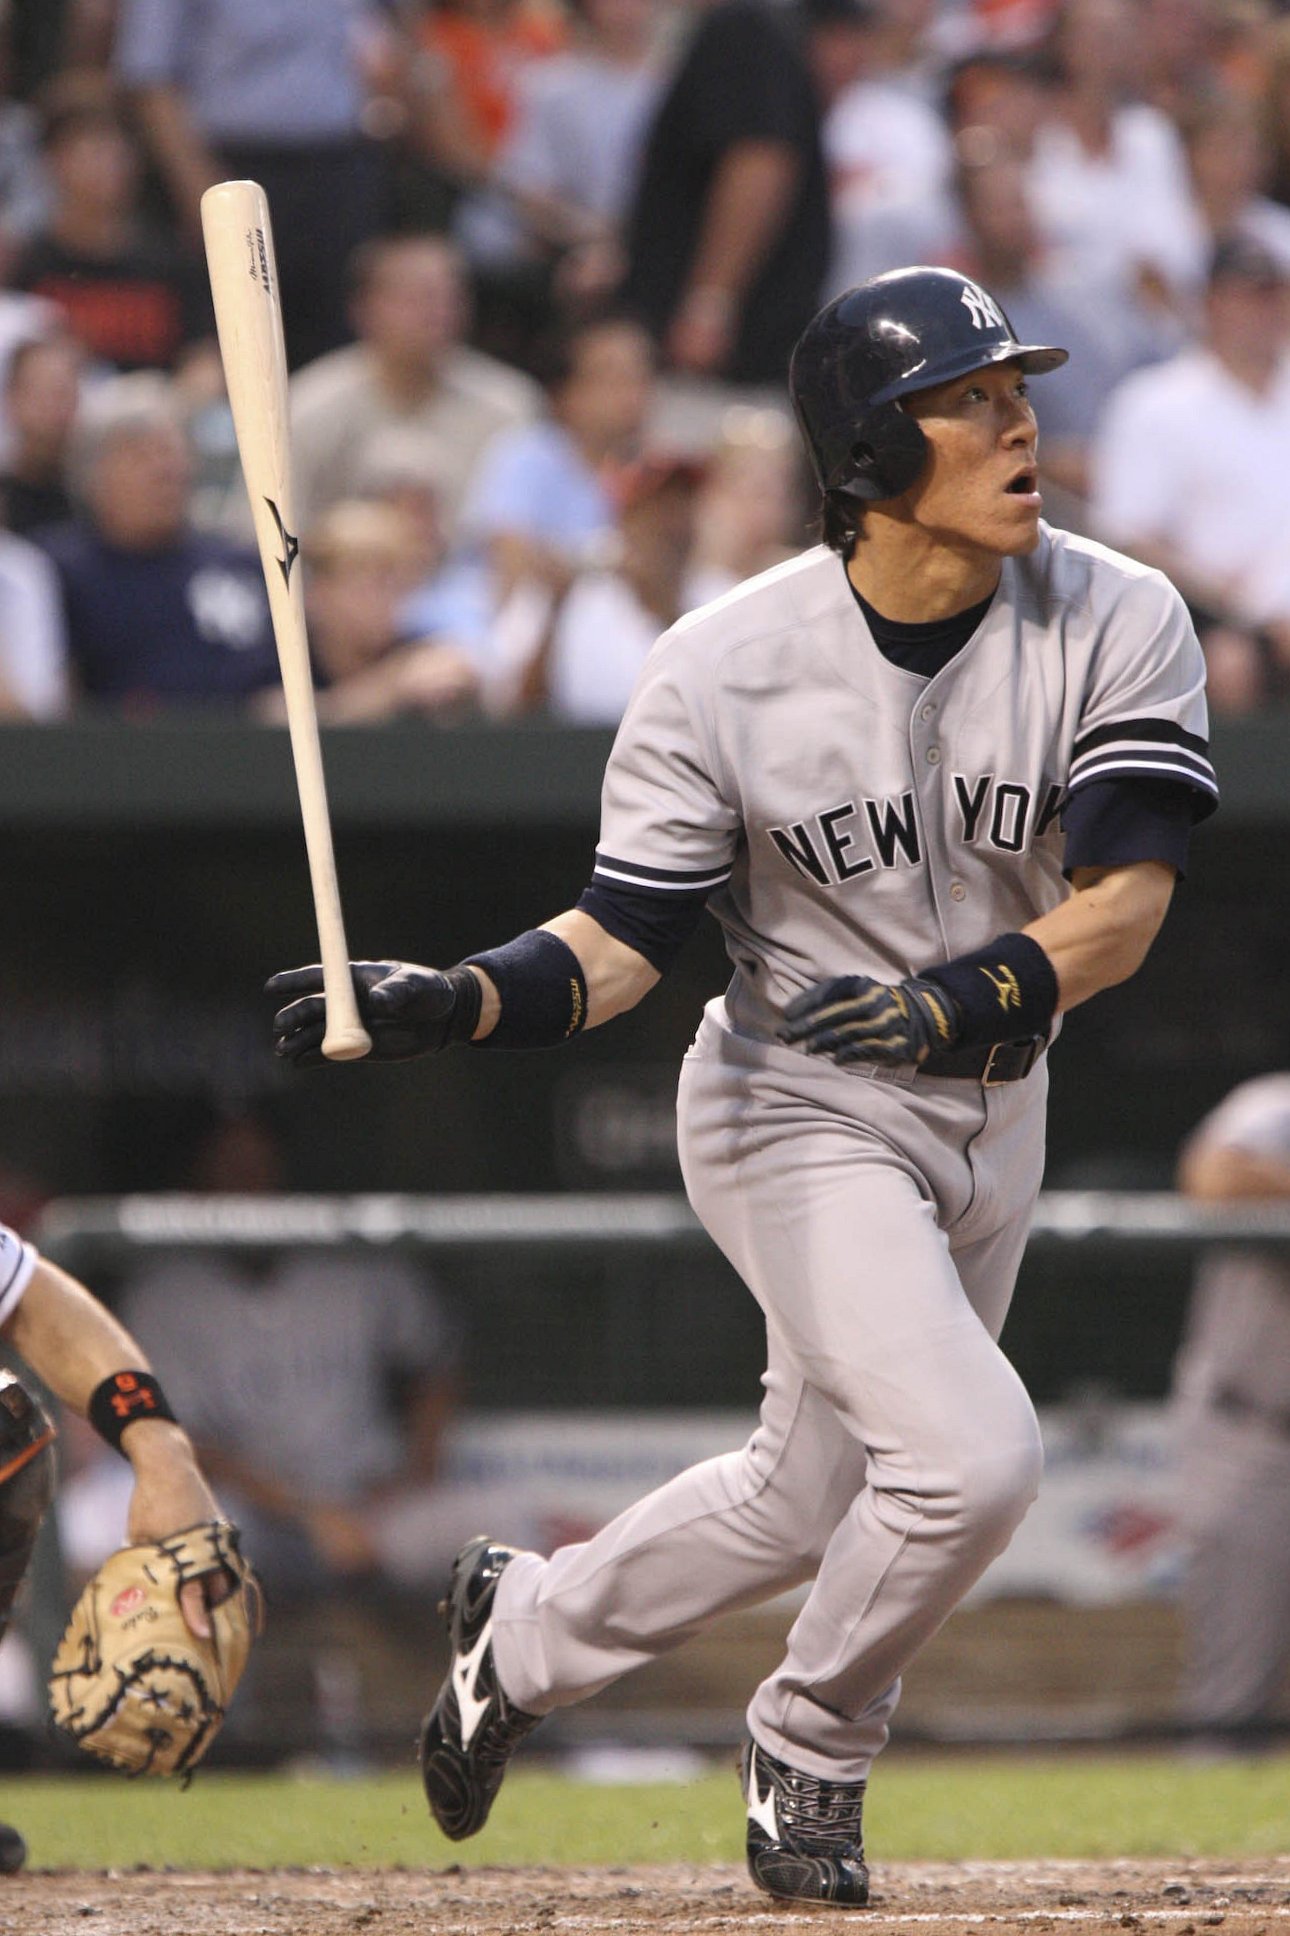 In 2009, he became first designated hitter to win the World Series MVP.